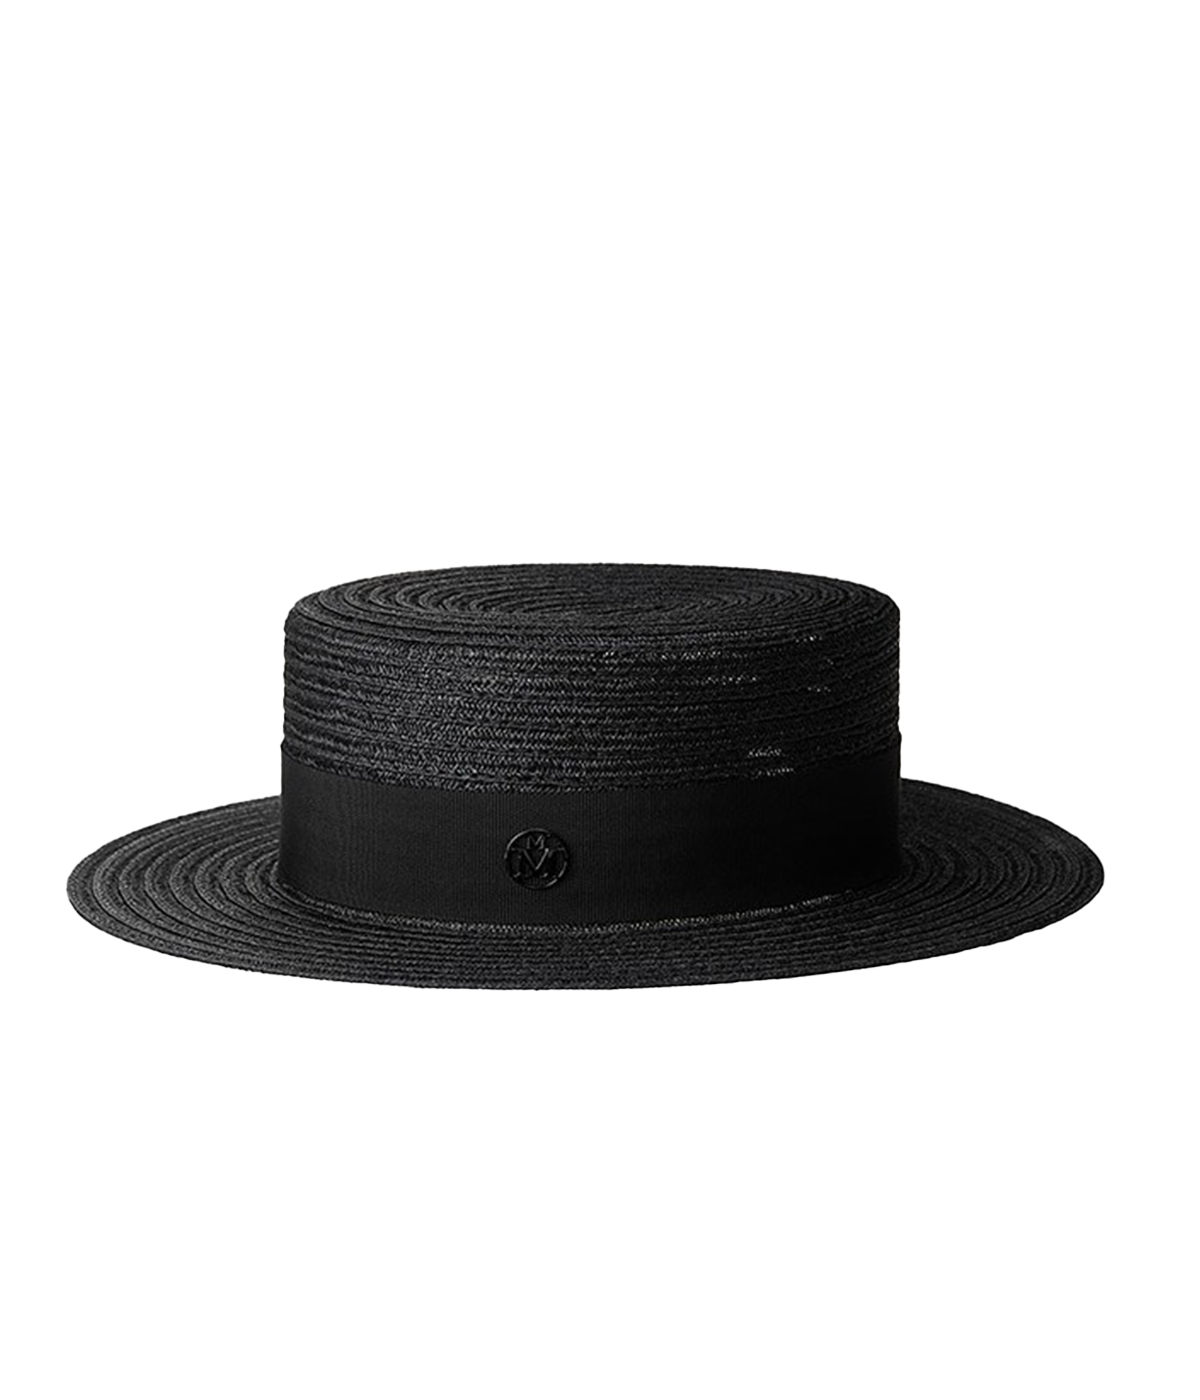 Crafted from woven hemp, this timeless black canotier hat has a flat top and brim. Perfect for a day at the races or the polo. 